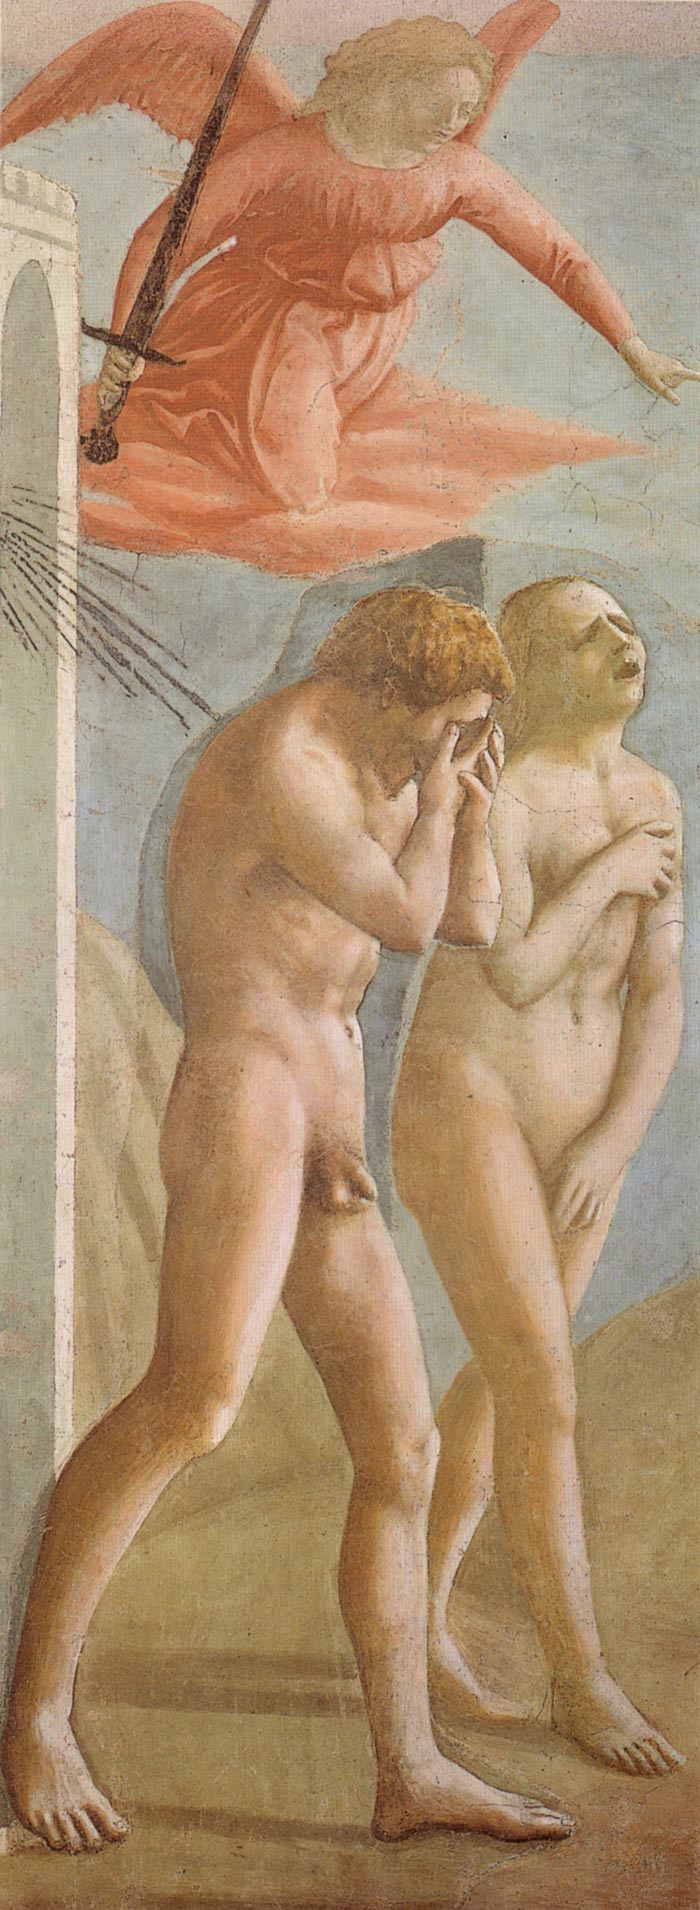 Art in Tuscany Masaccio The Expulsion Of Adam and Eve from Eden Travel guide for Tuscany